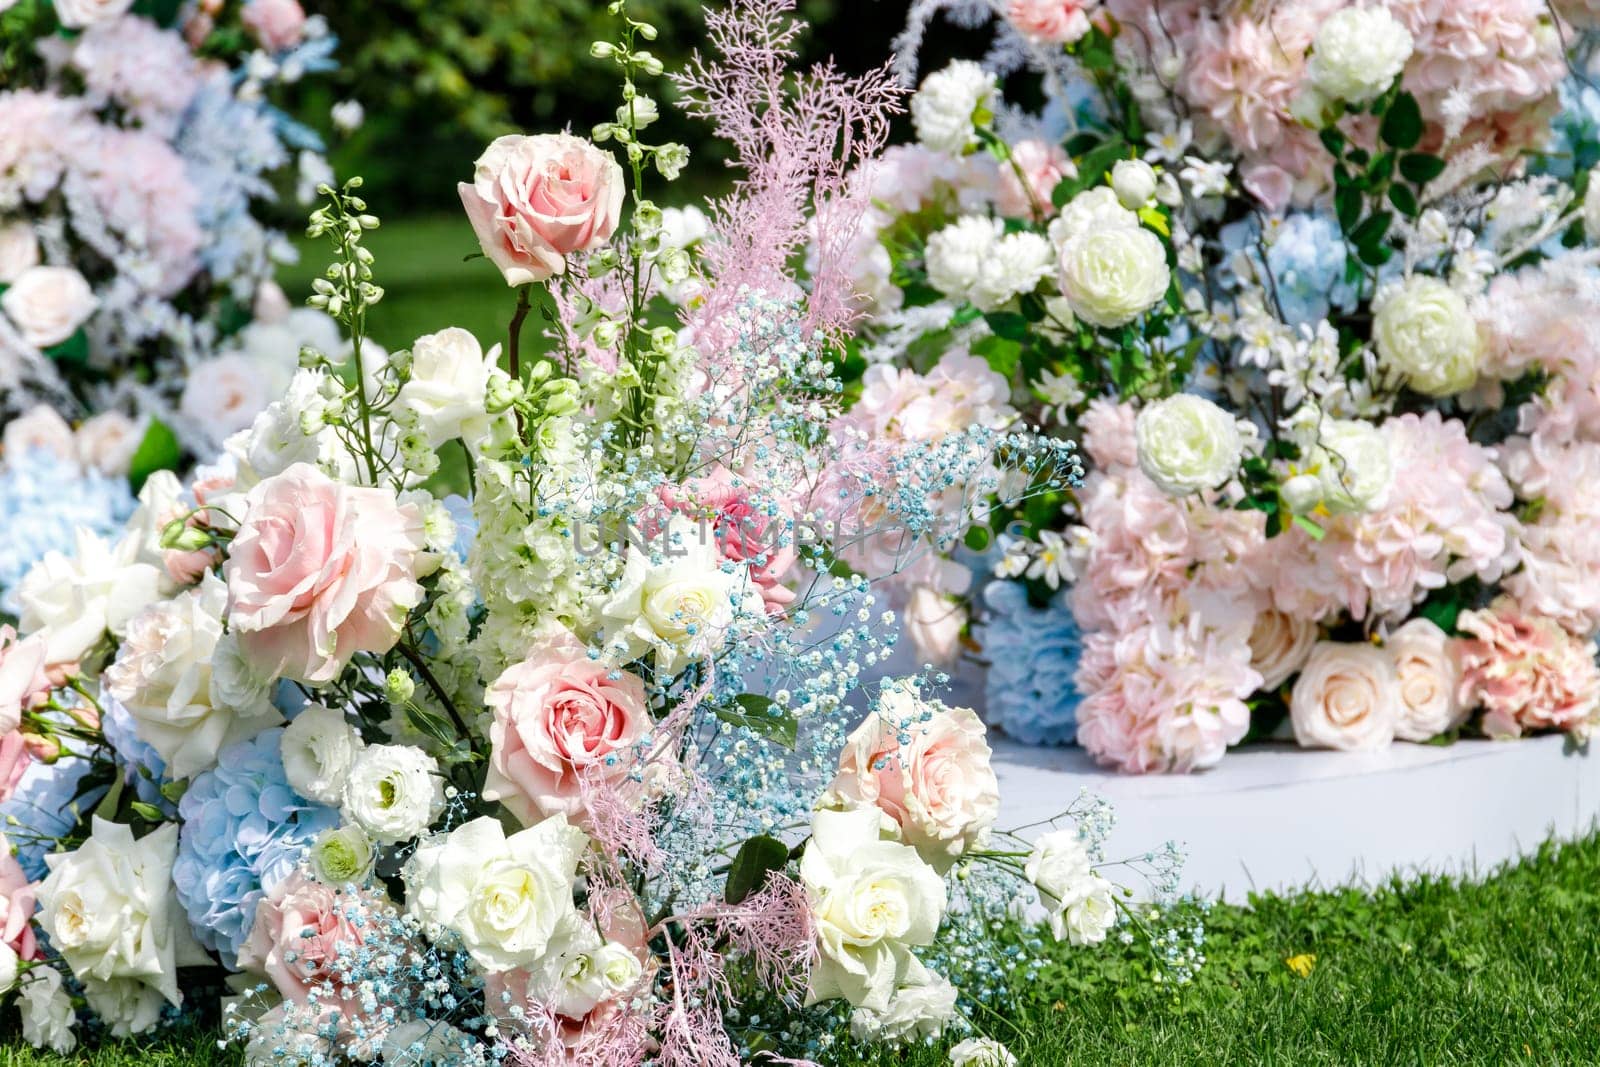 European wedding flowers in different kinds of light pink colors. High quality photo